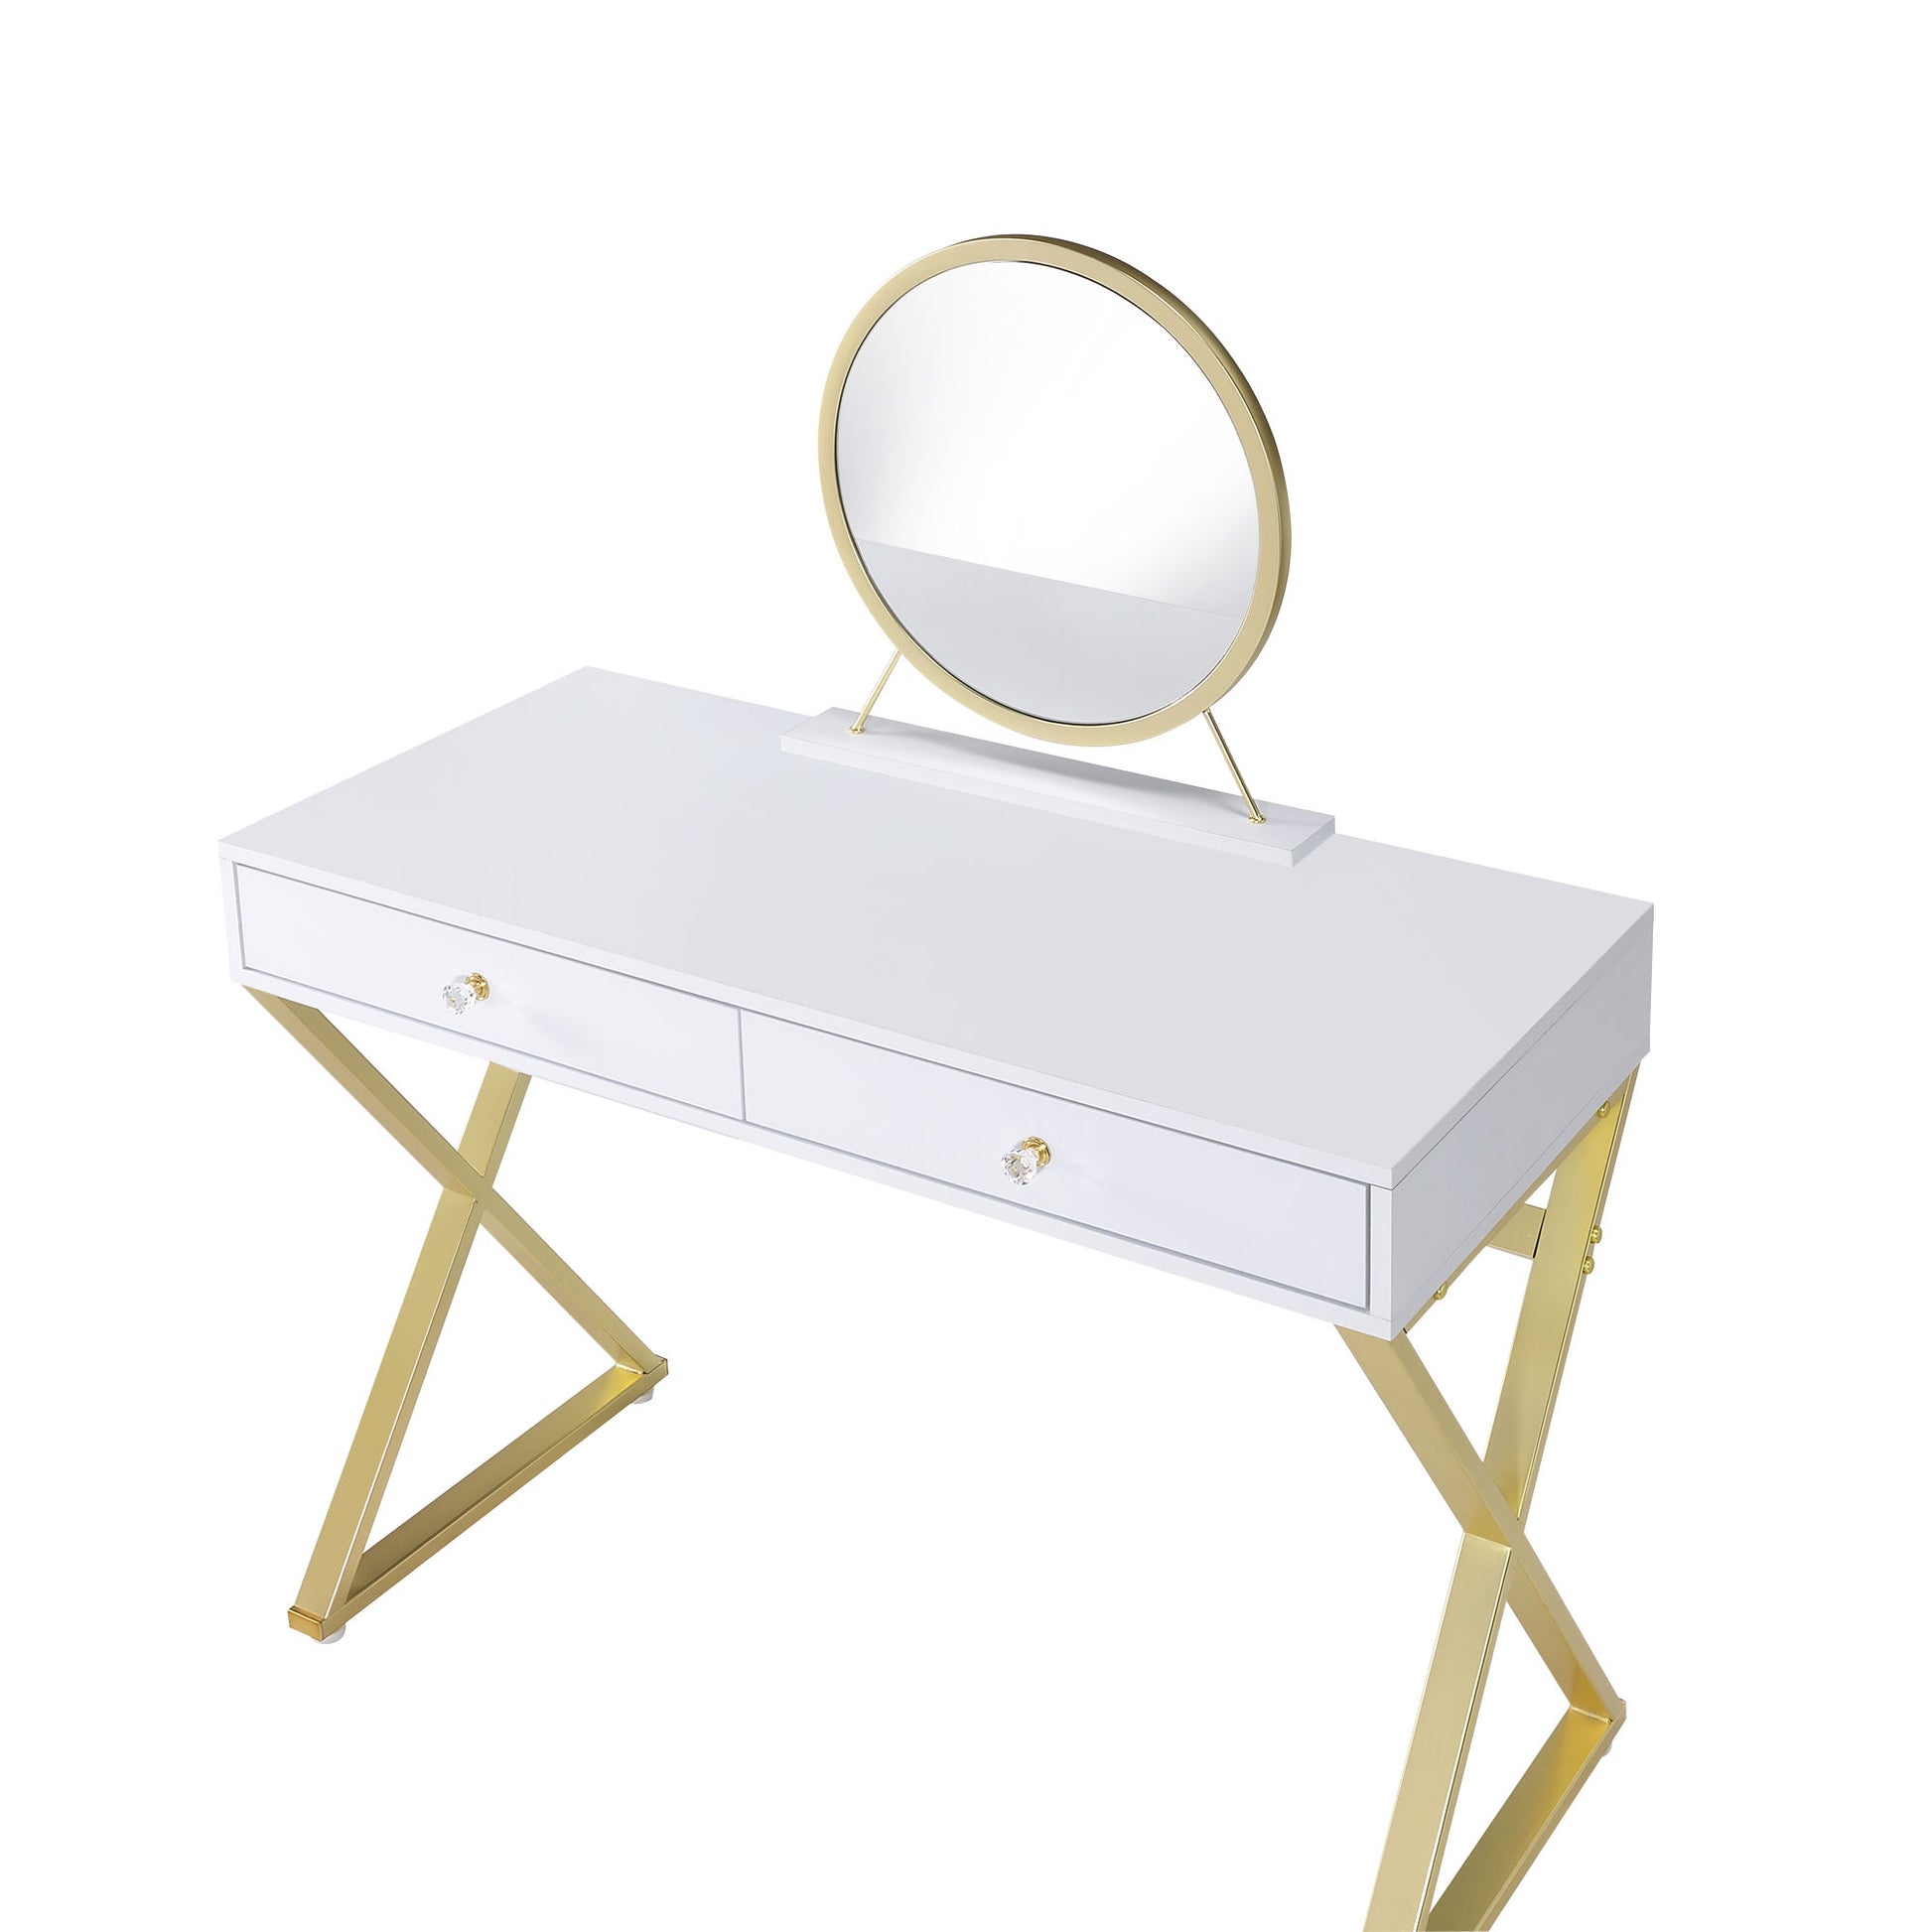 ACME Coleen Vanity Desk w/Mirror & Jewelry Tray in White & Gold Finish AC00667 - lolaluxeshop